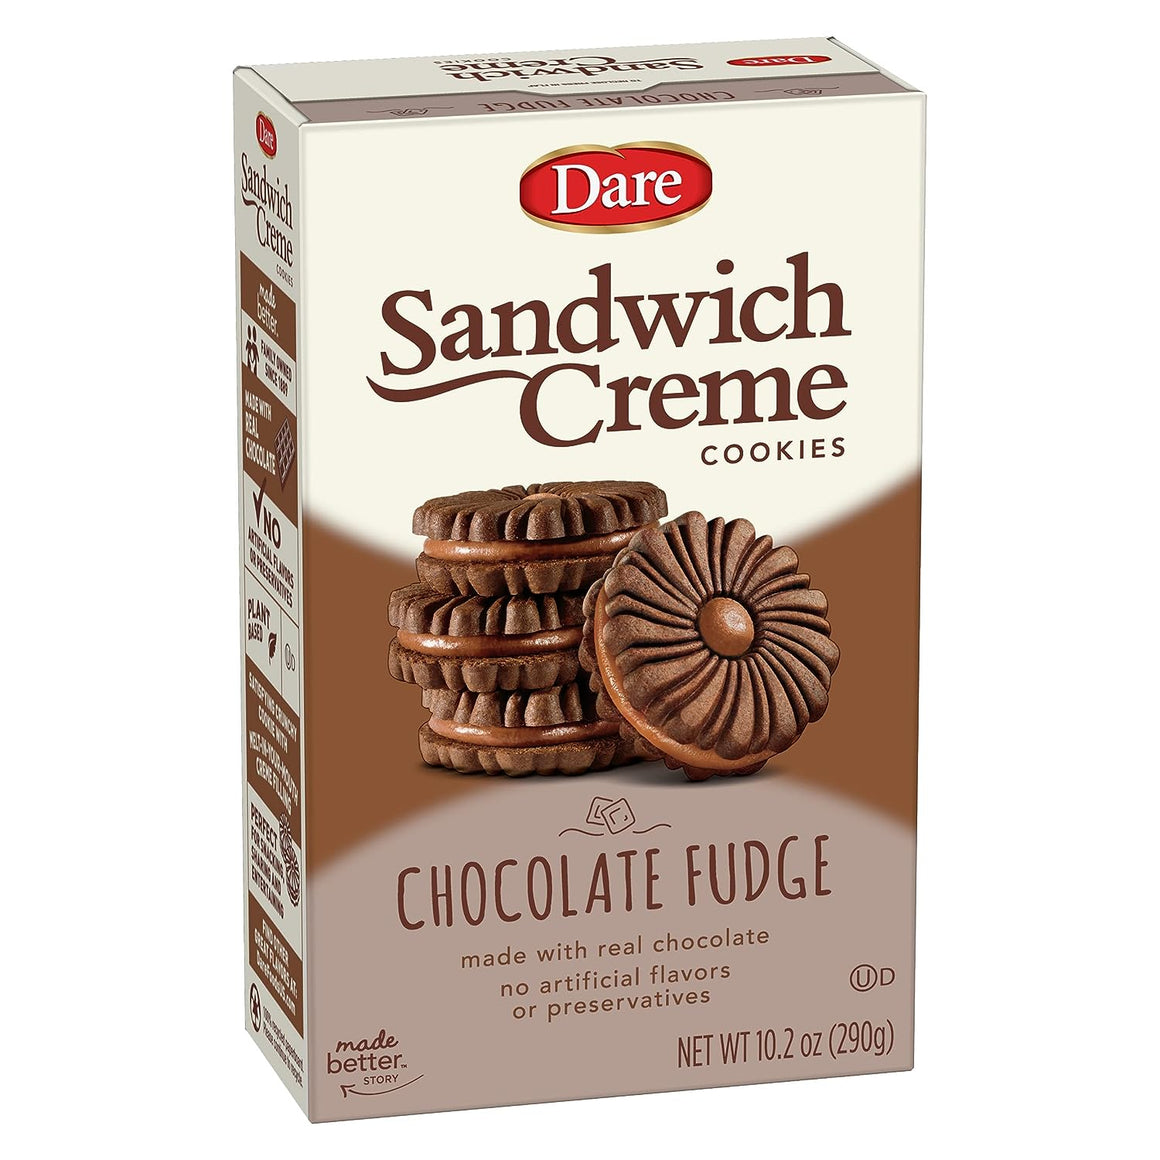 All City Candy Dare Chocolate Fudge Cookies 10.2 oz. Box Snacks Dare Foods For fresh candy and great service, visit www.allcitycandy.com